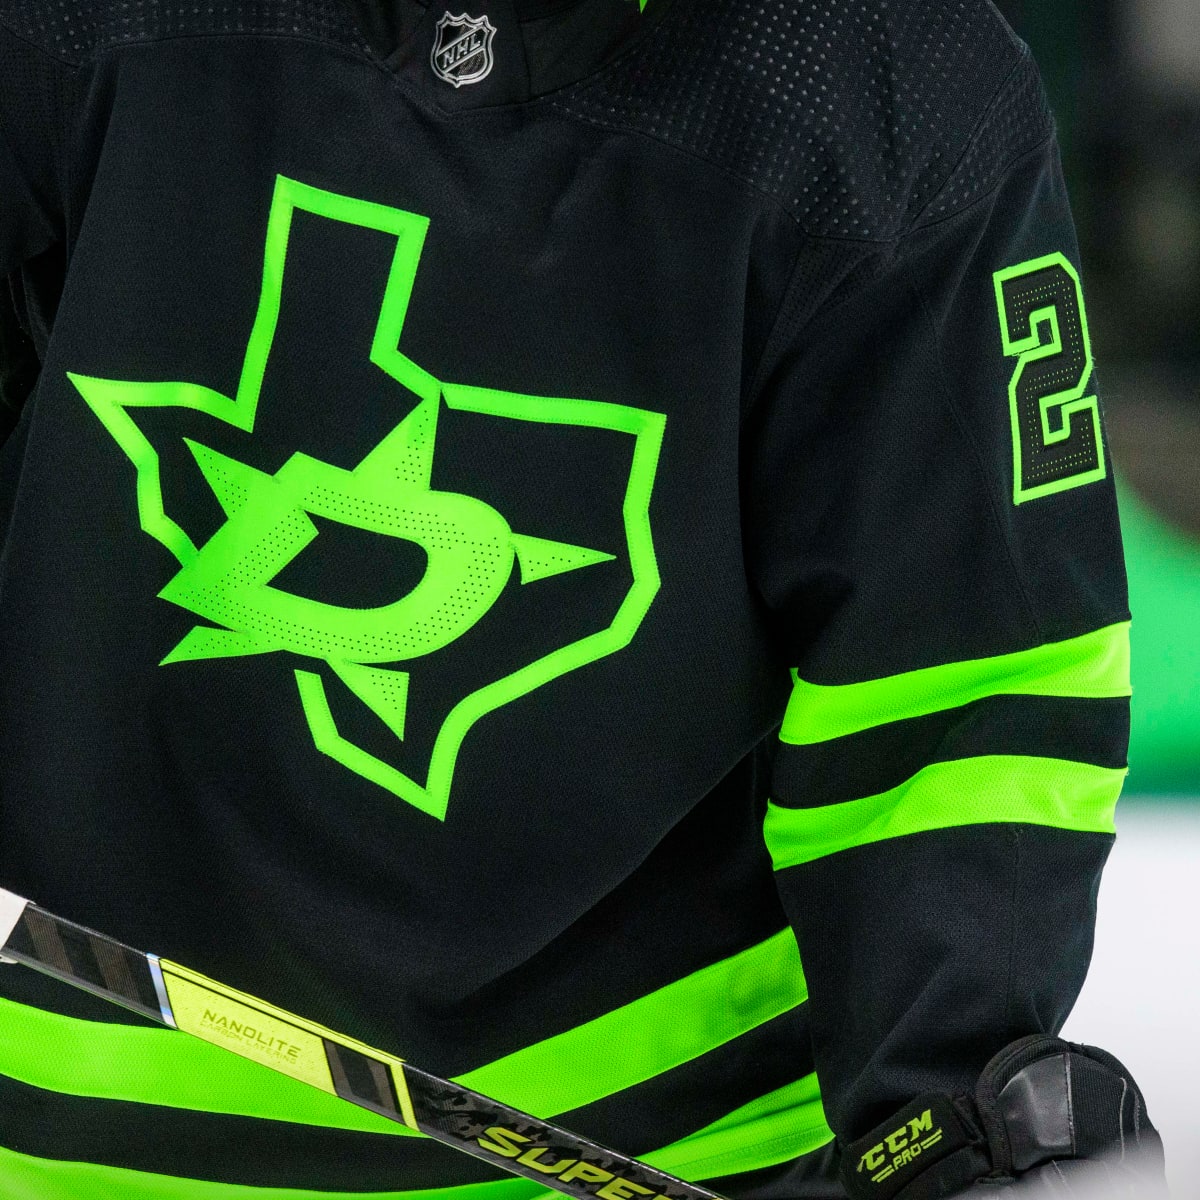 Report: Jersey Advertisements Could Arrive In NHL As Soon As 2022-23 Season